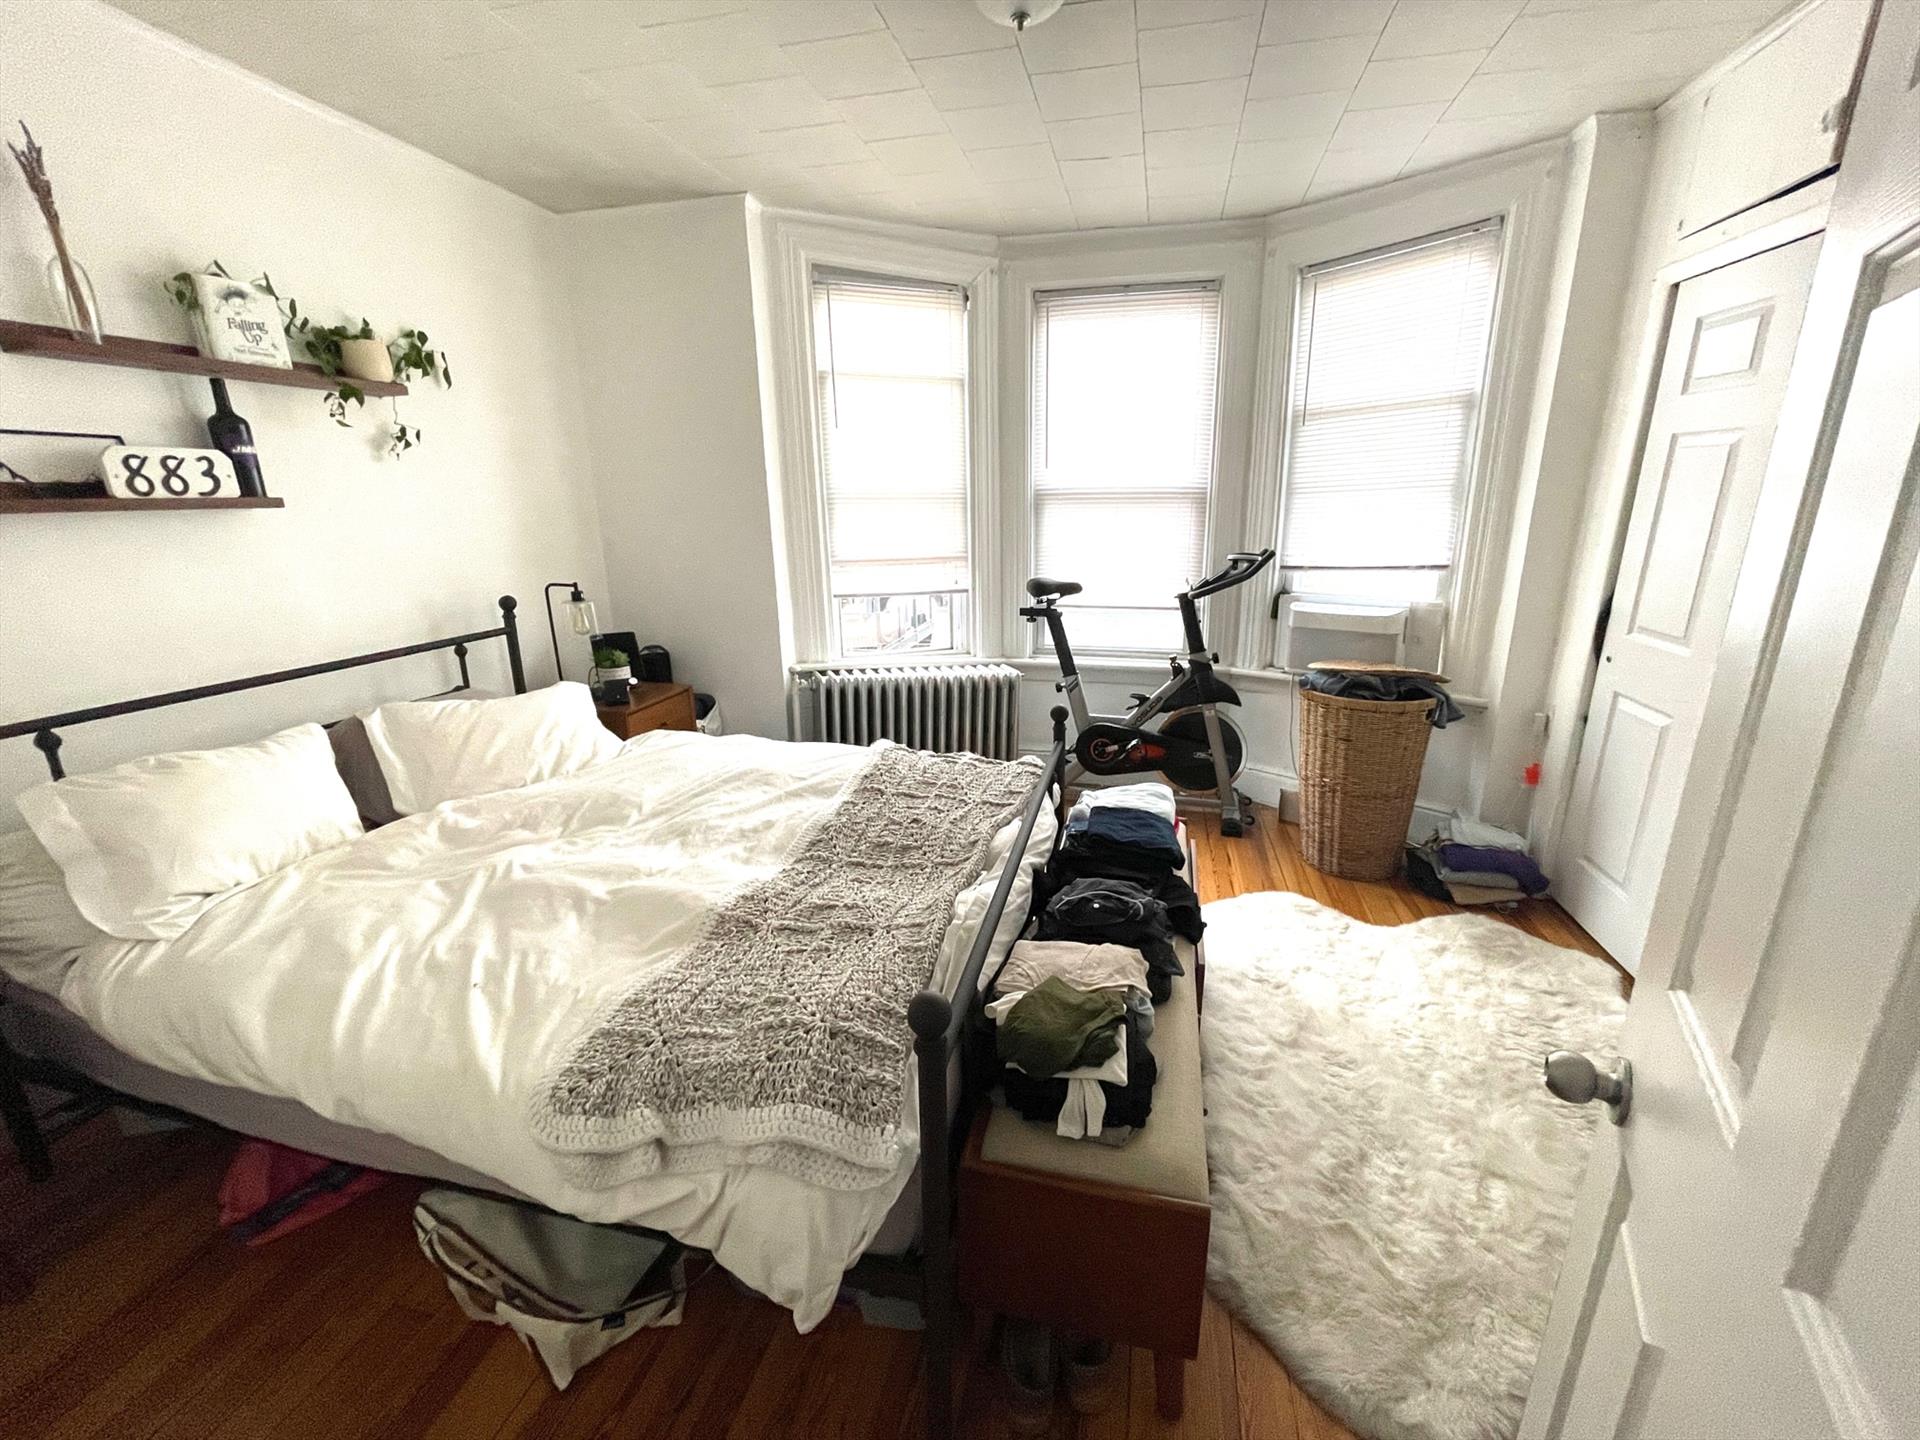 Centrally located 1 bed 1 bath in Hoboken NJ!  This apartment features hardwood floors, stainless steel appliances and an eat-in kitchen! Heat and hot water included. No pets allowed. One month broker fee. Available 2/1/23.